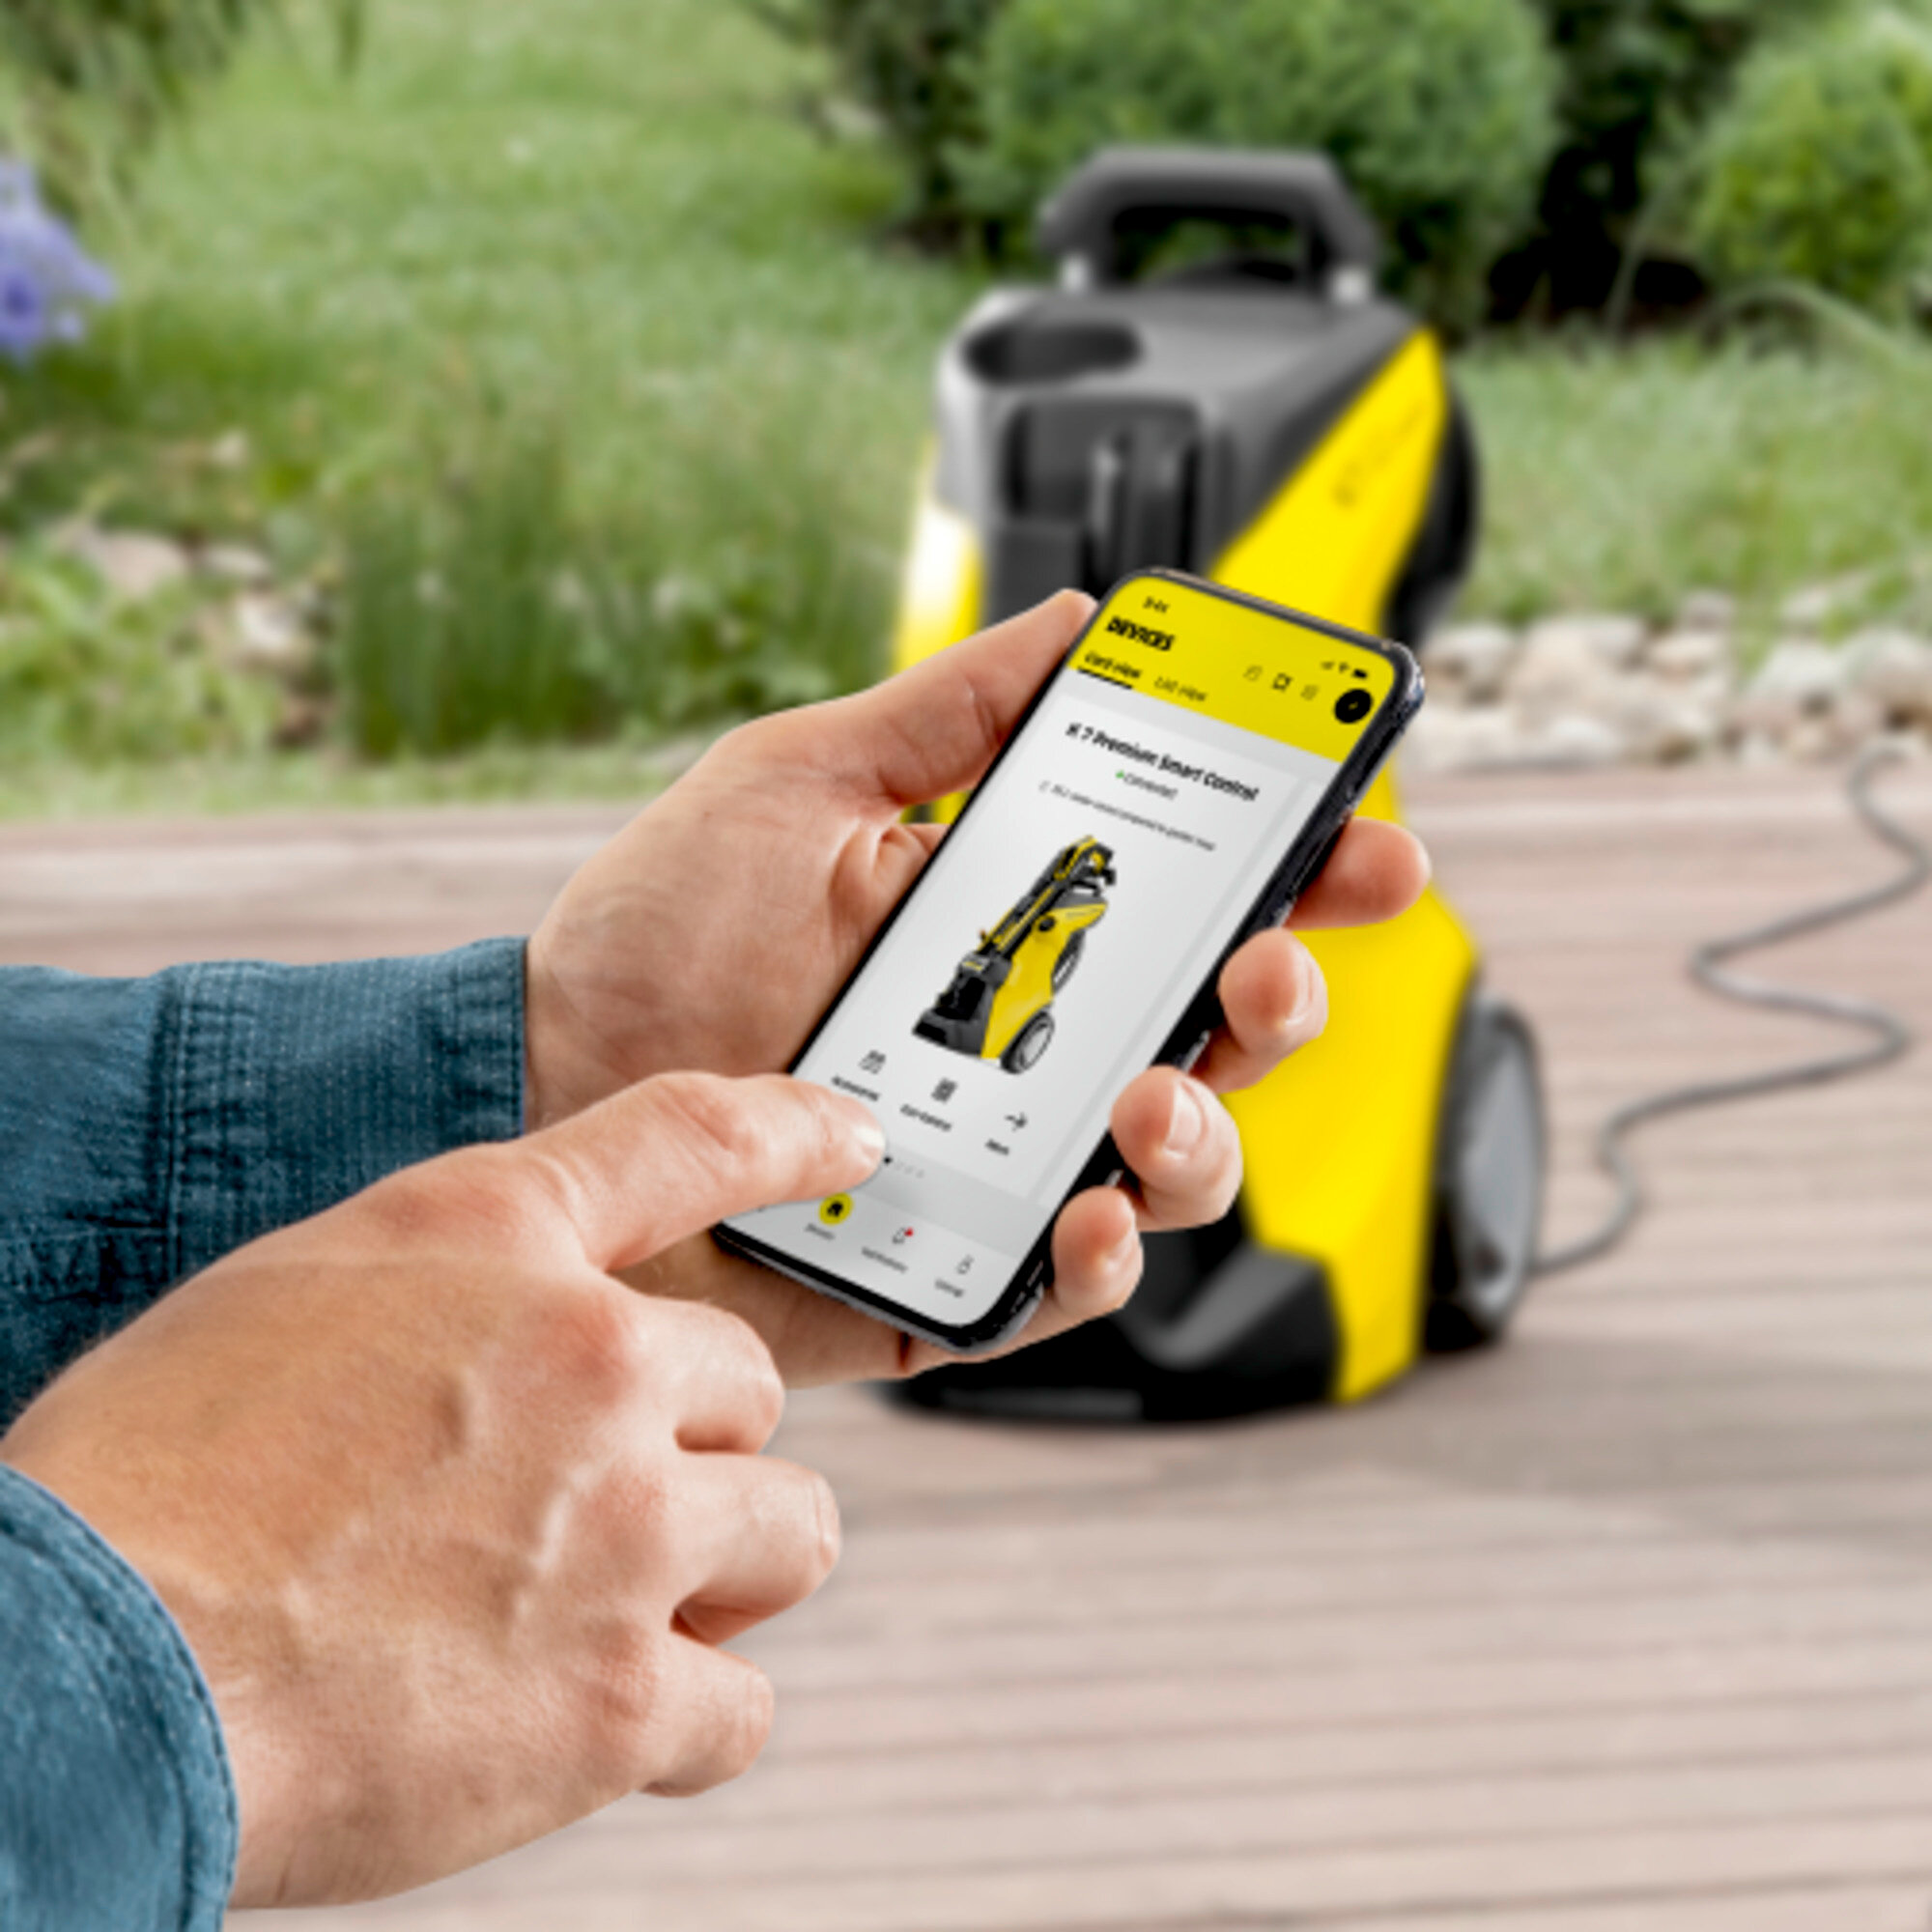 Pressure washer K 7 Premium Smart Control Home: Connects to the Home & Garden app via Bluetooth